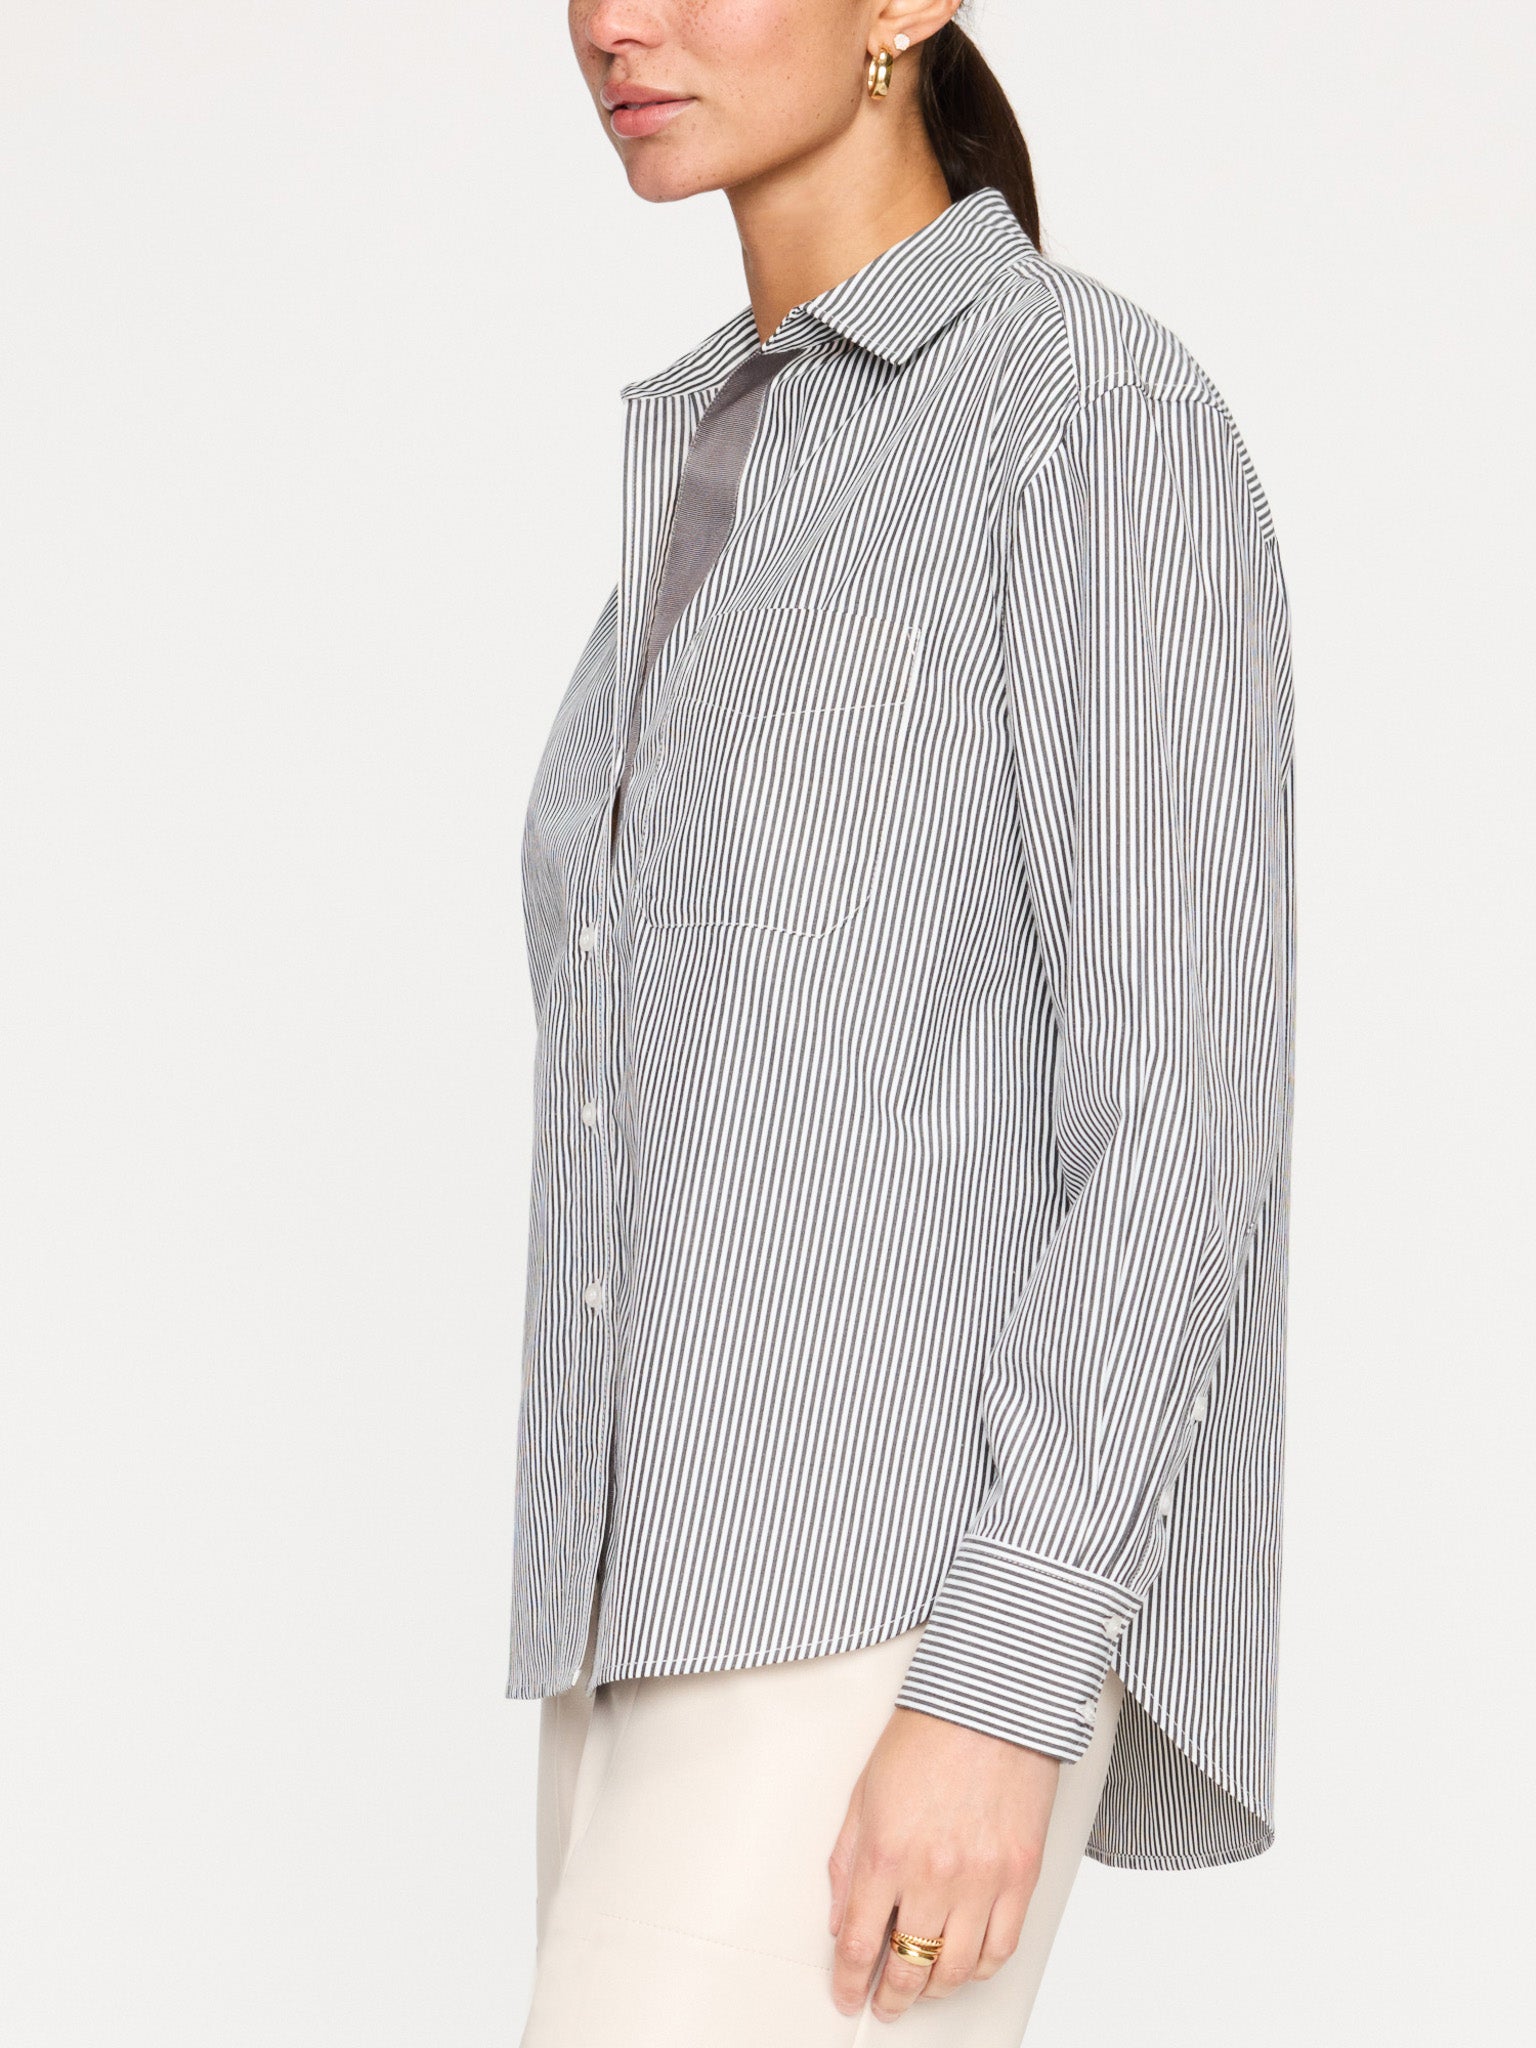 Everyday button up grey stripe shirt side view